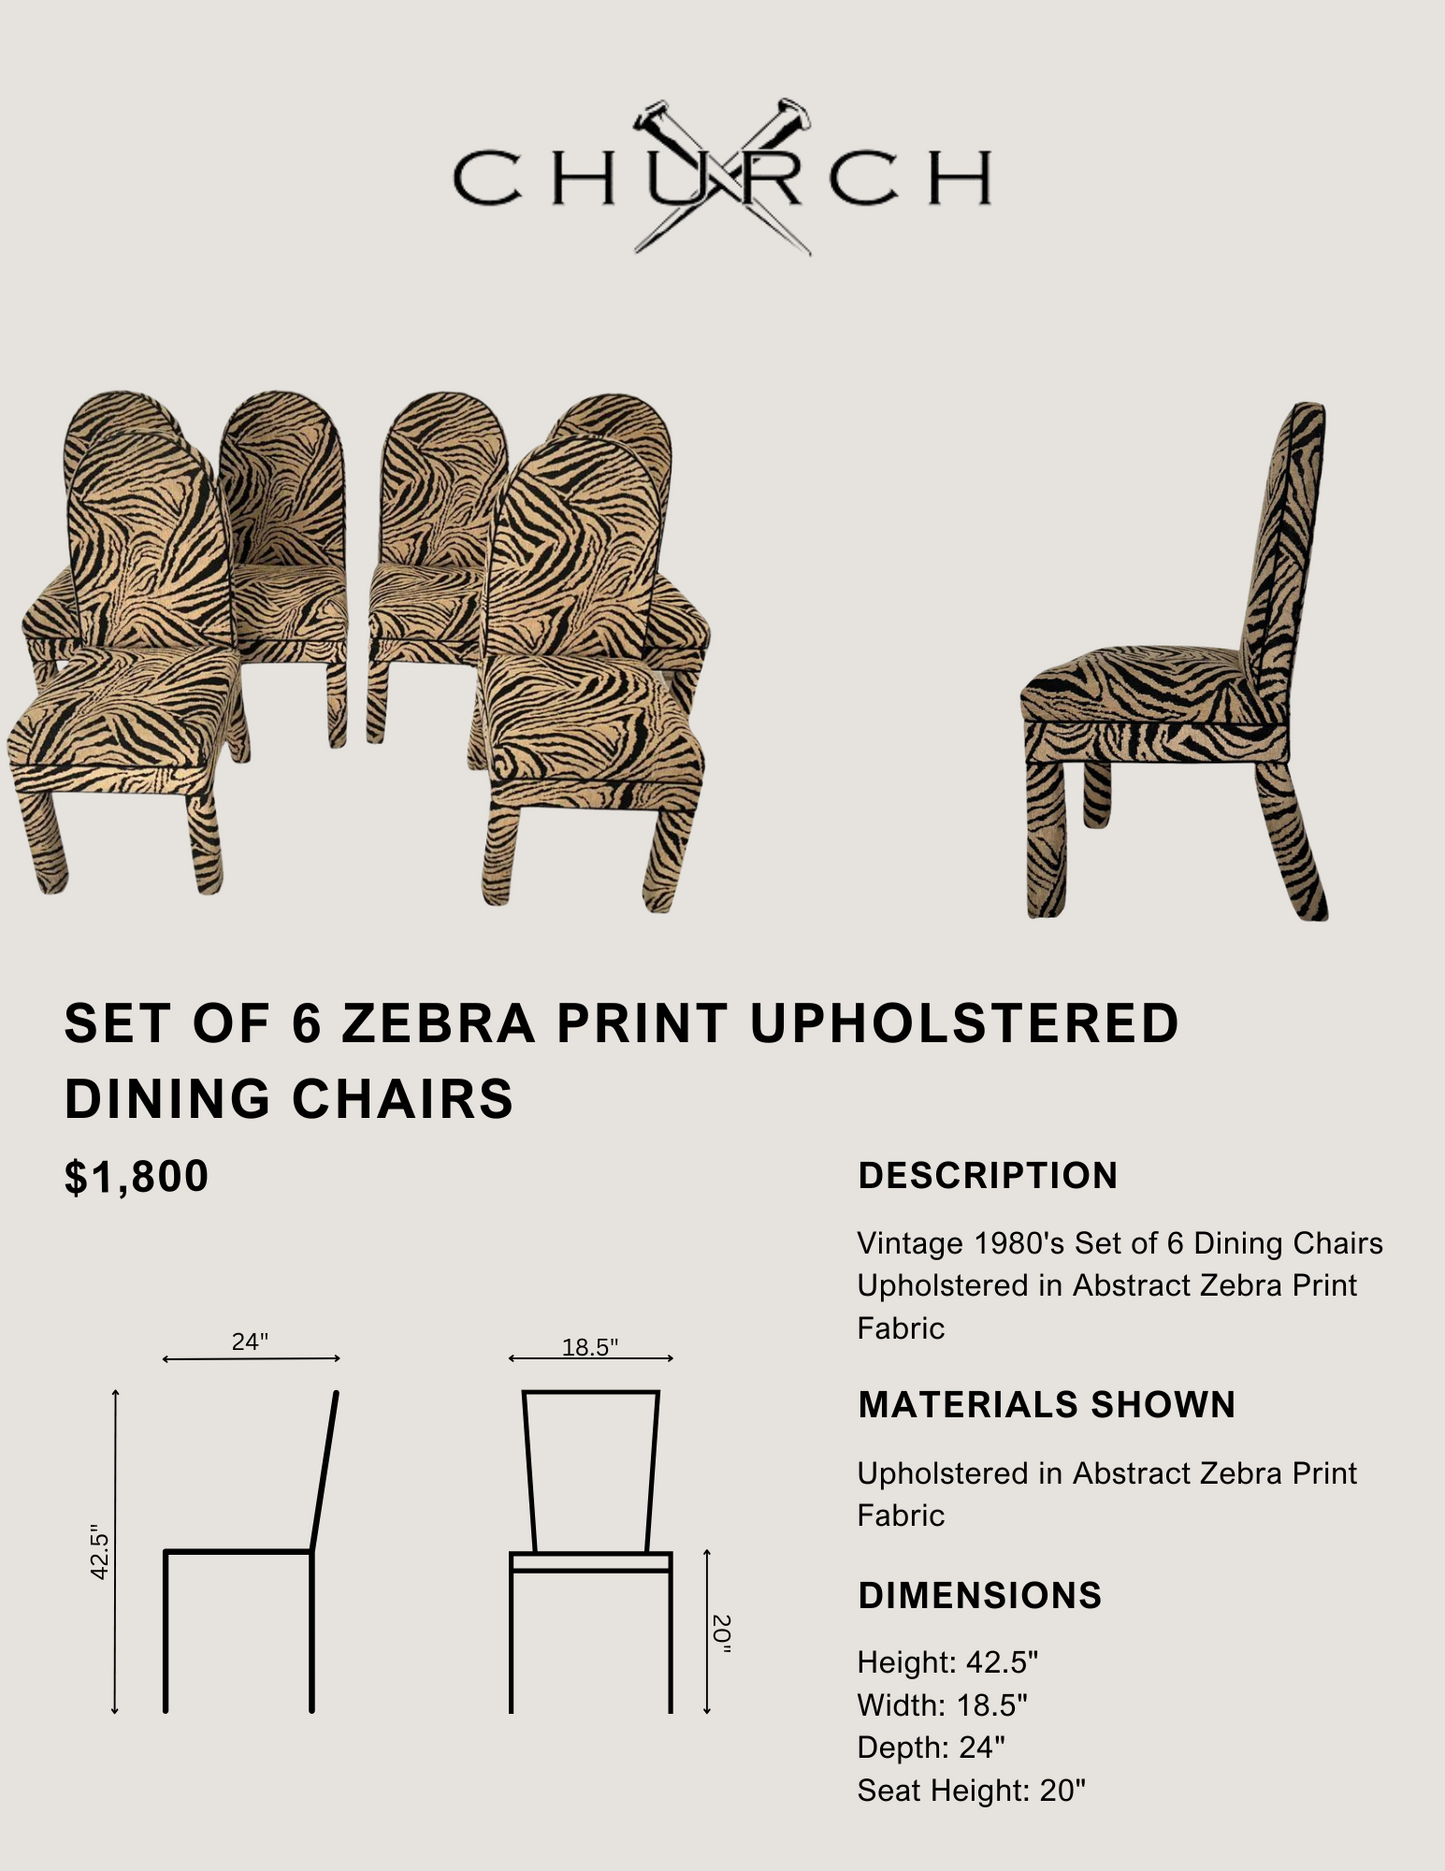 Set of 6 Zebra Print Upholstered Dining Chairs